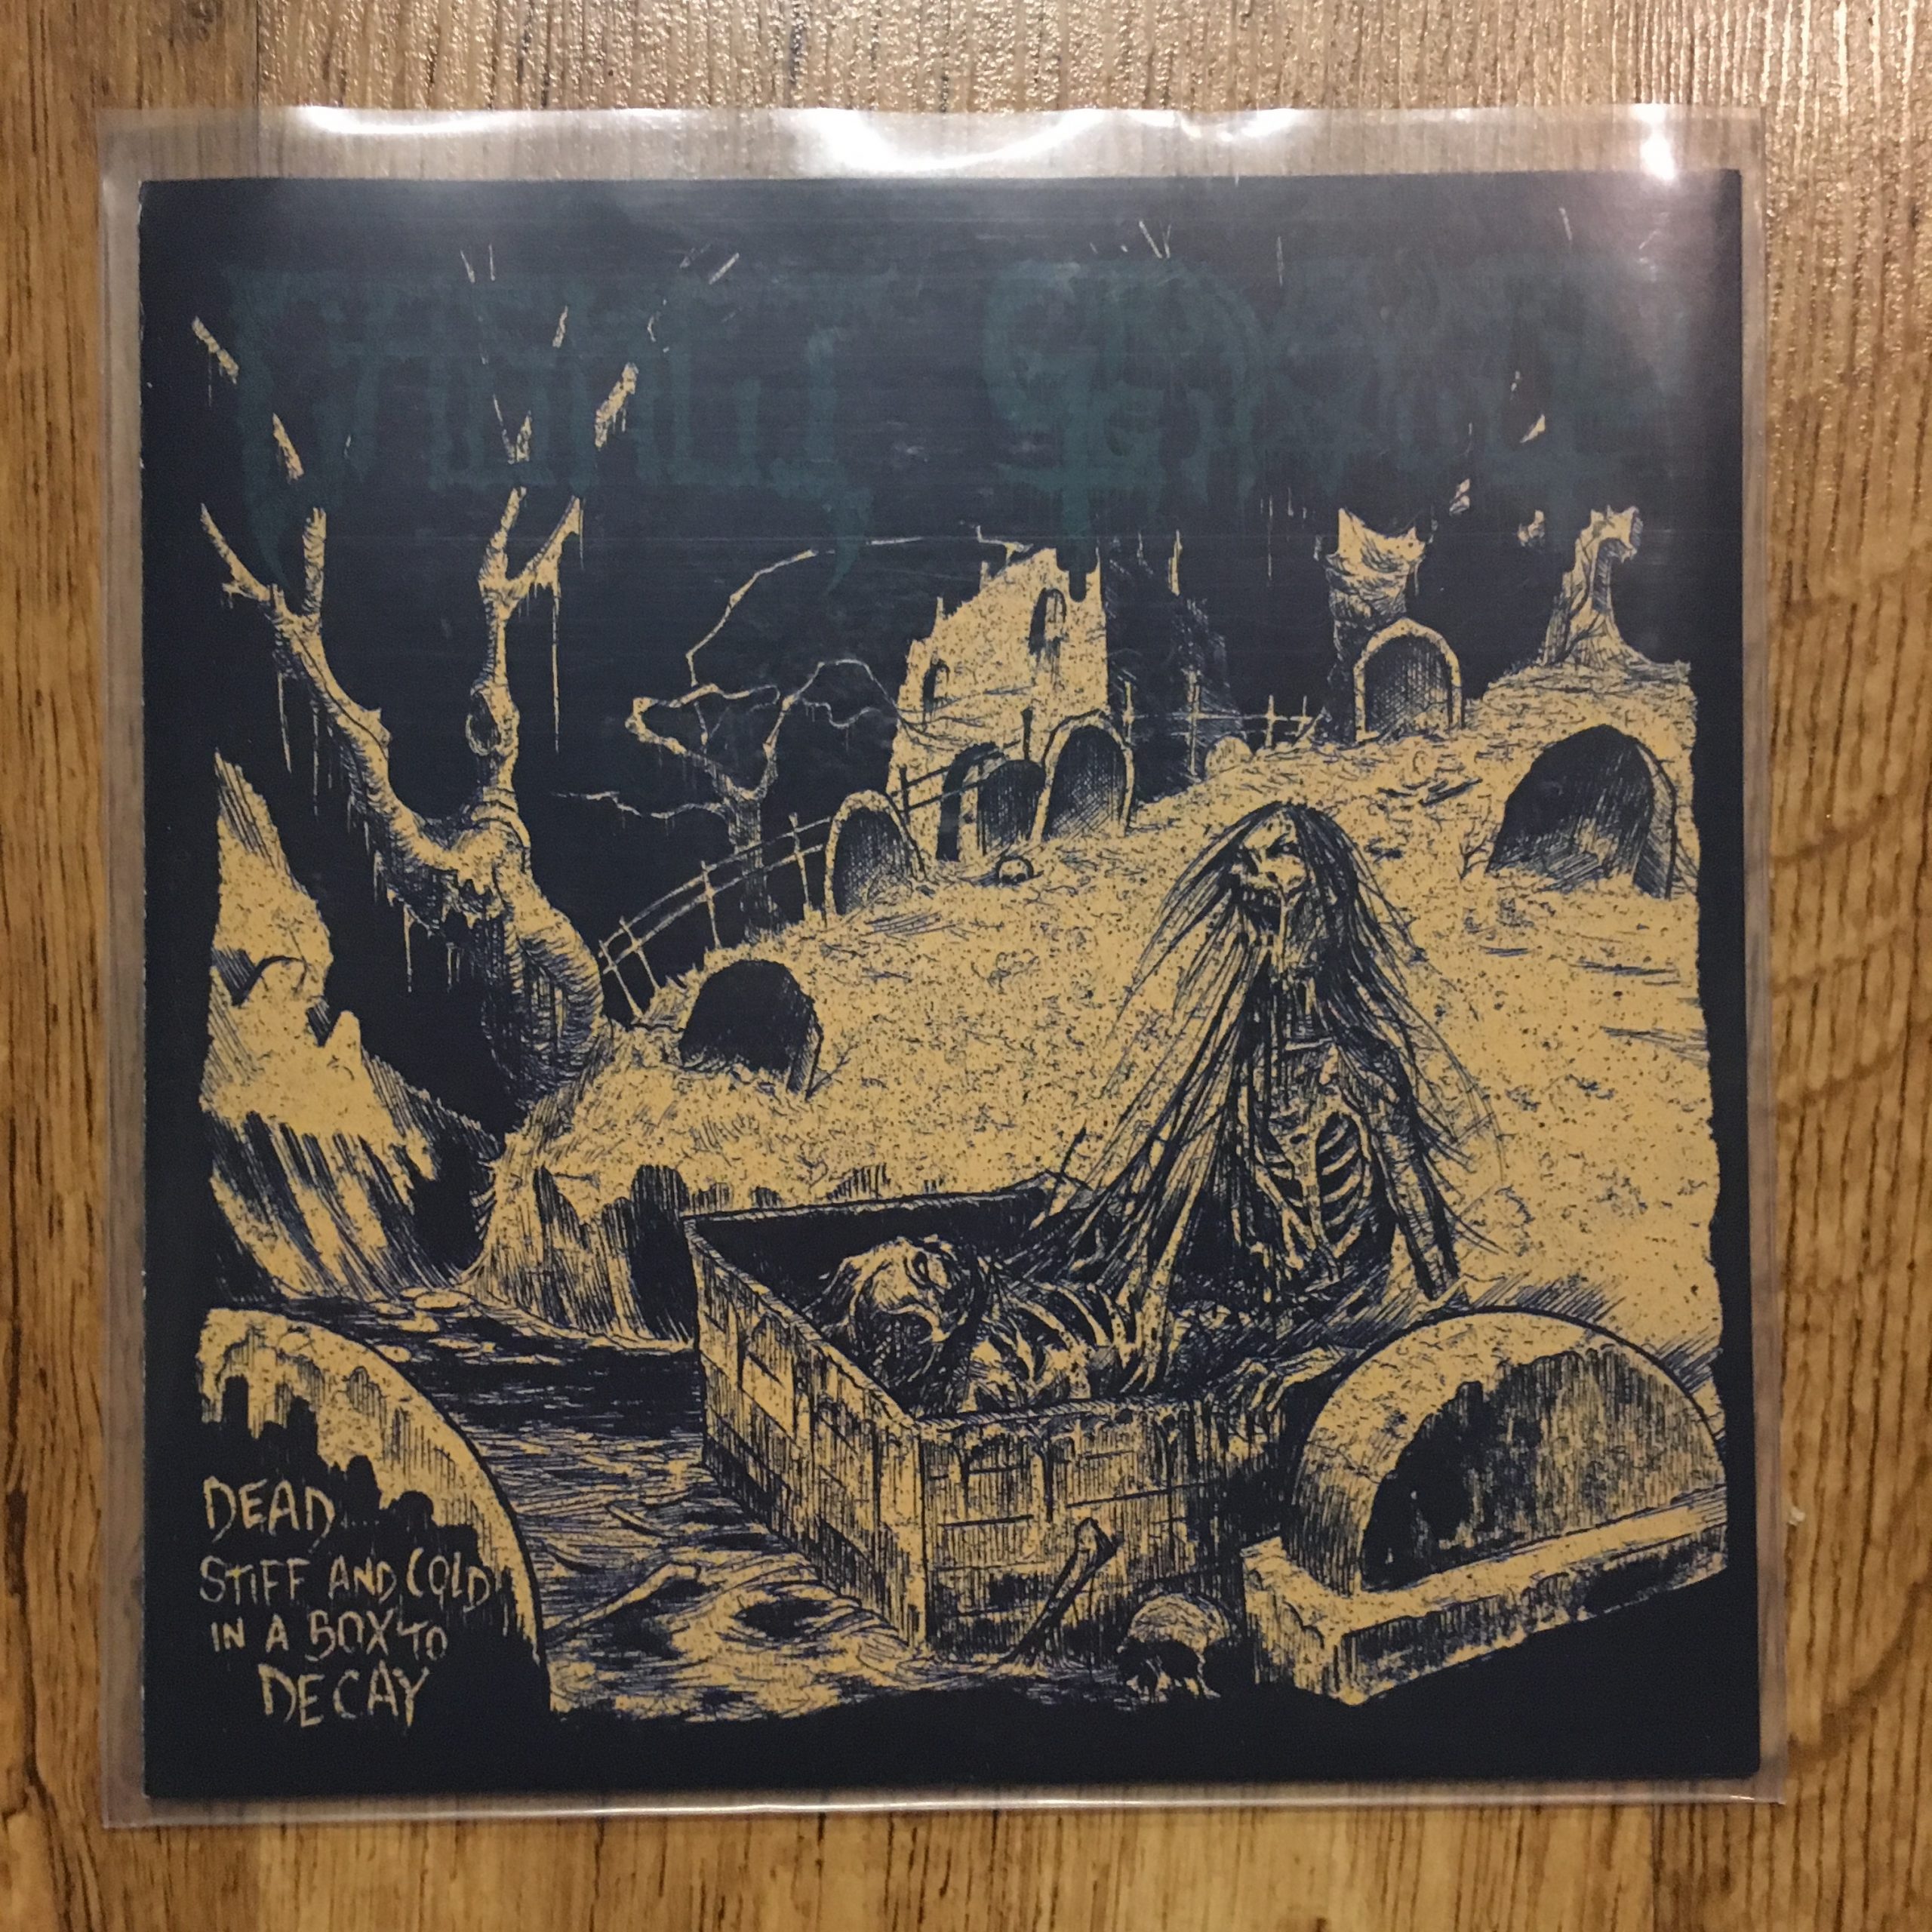 Photo of the Graveyard Ghoul / Casket - "Dead... Stiff and Cold in a Box to Decay" 7" EP (Black vinyl)